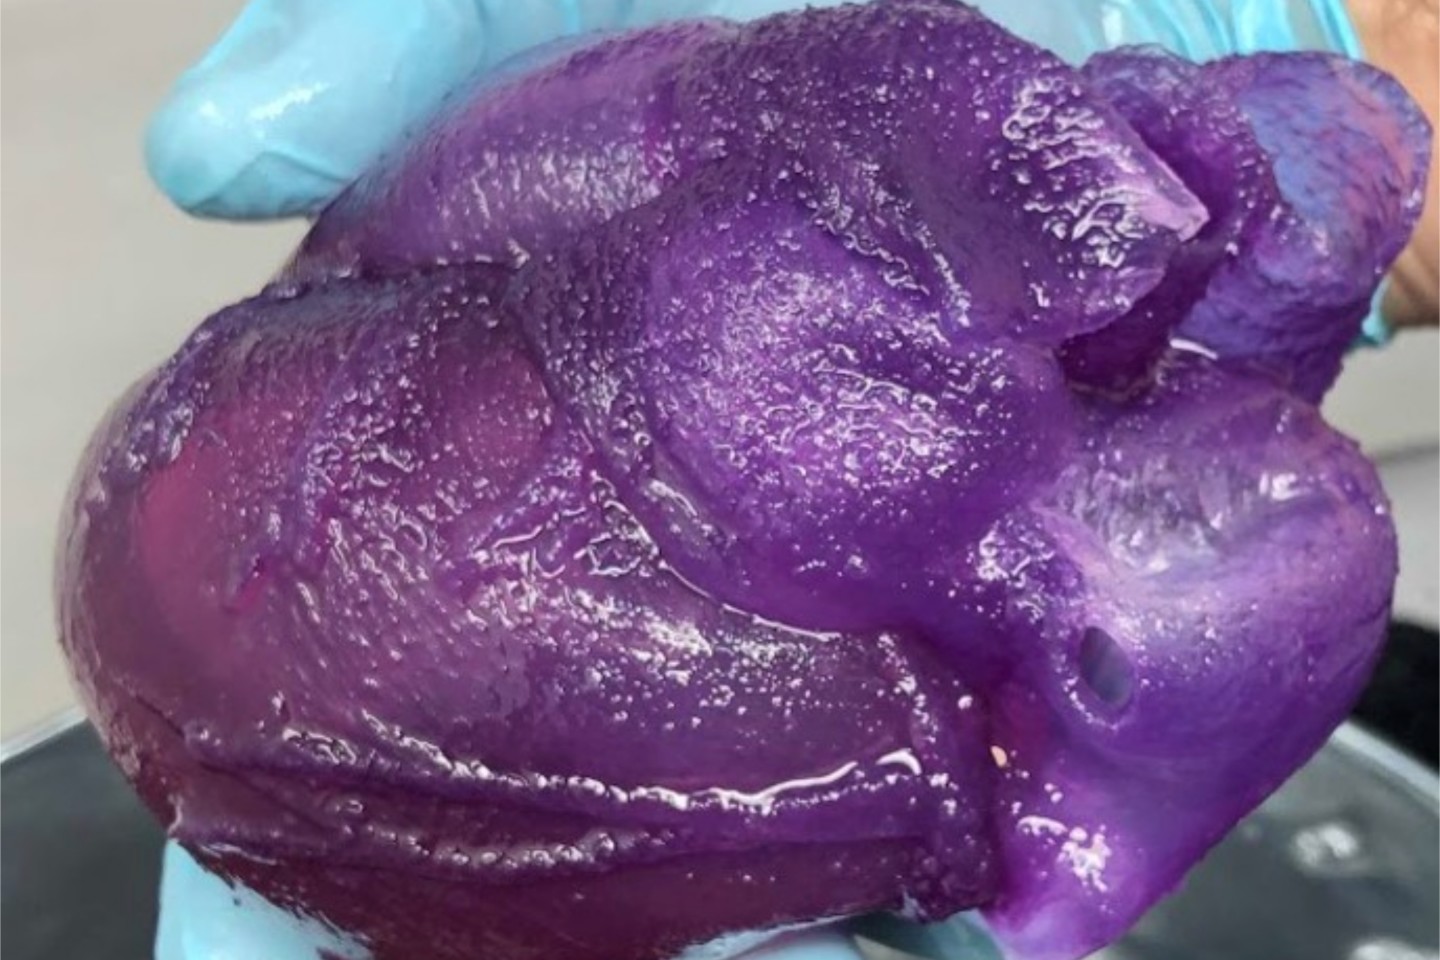 3D-Printed Life-Size Model Heart Has the Same Texture as the Real One